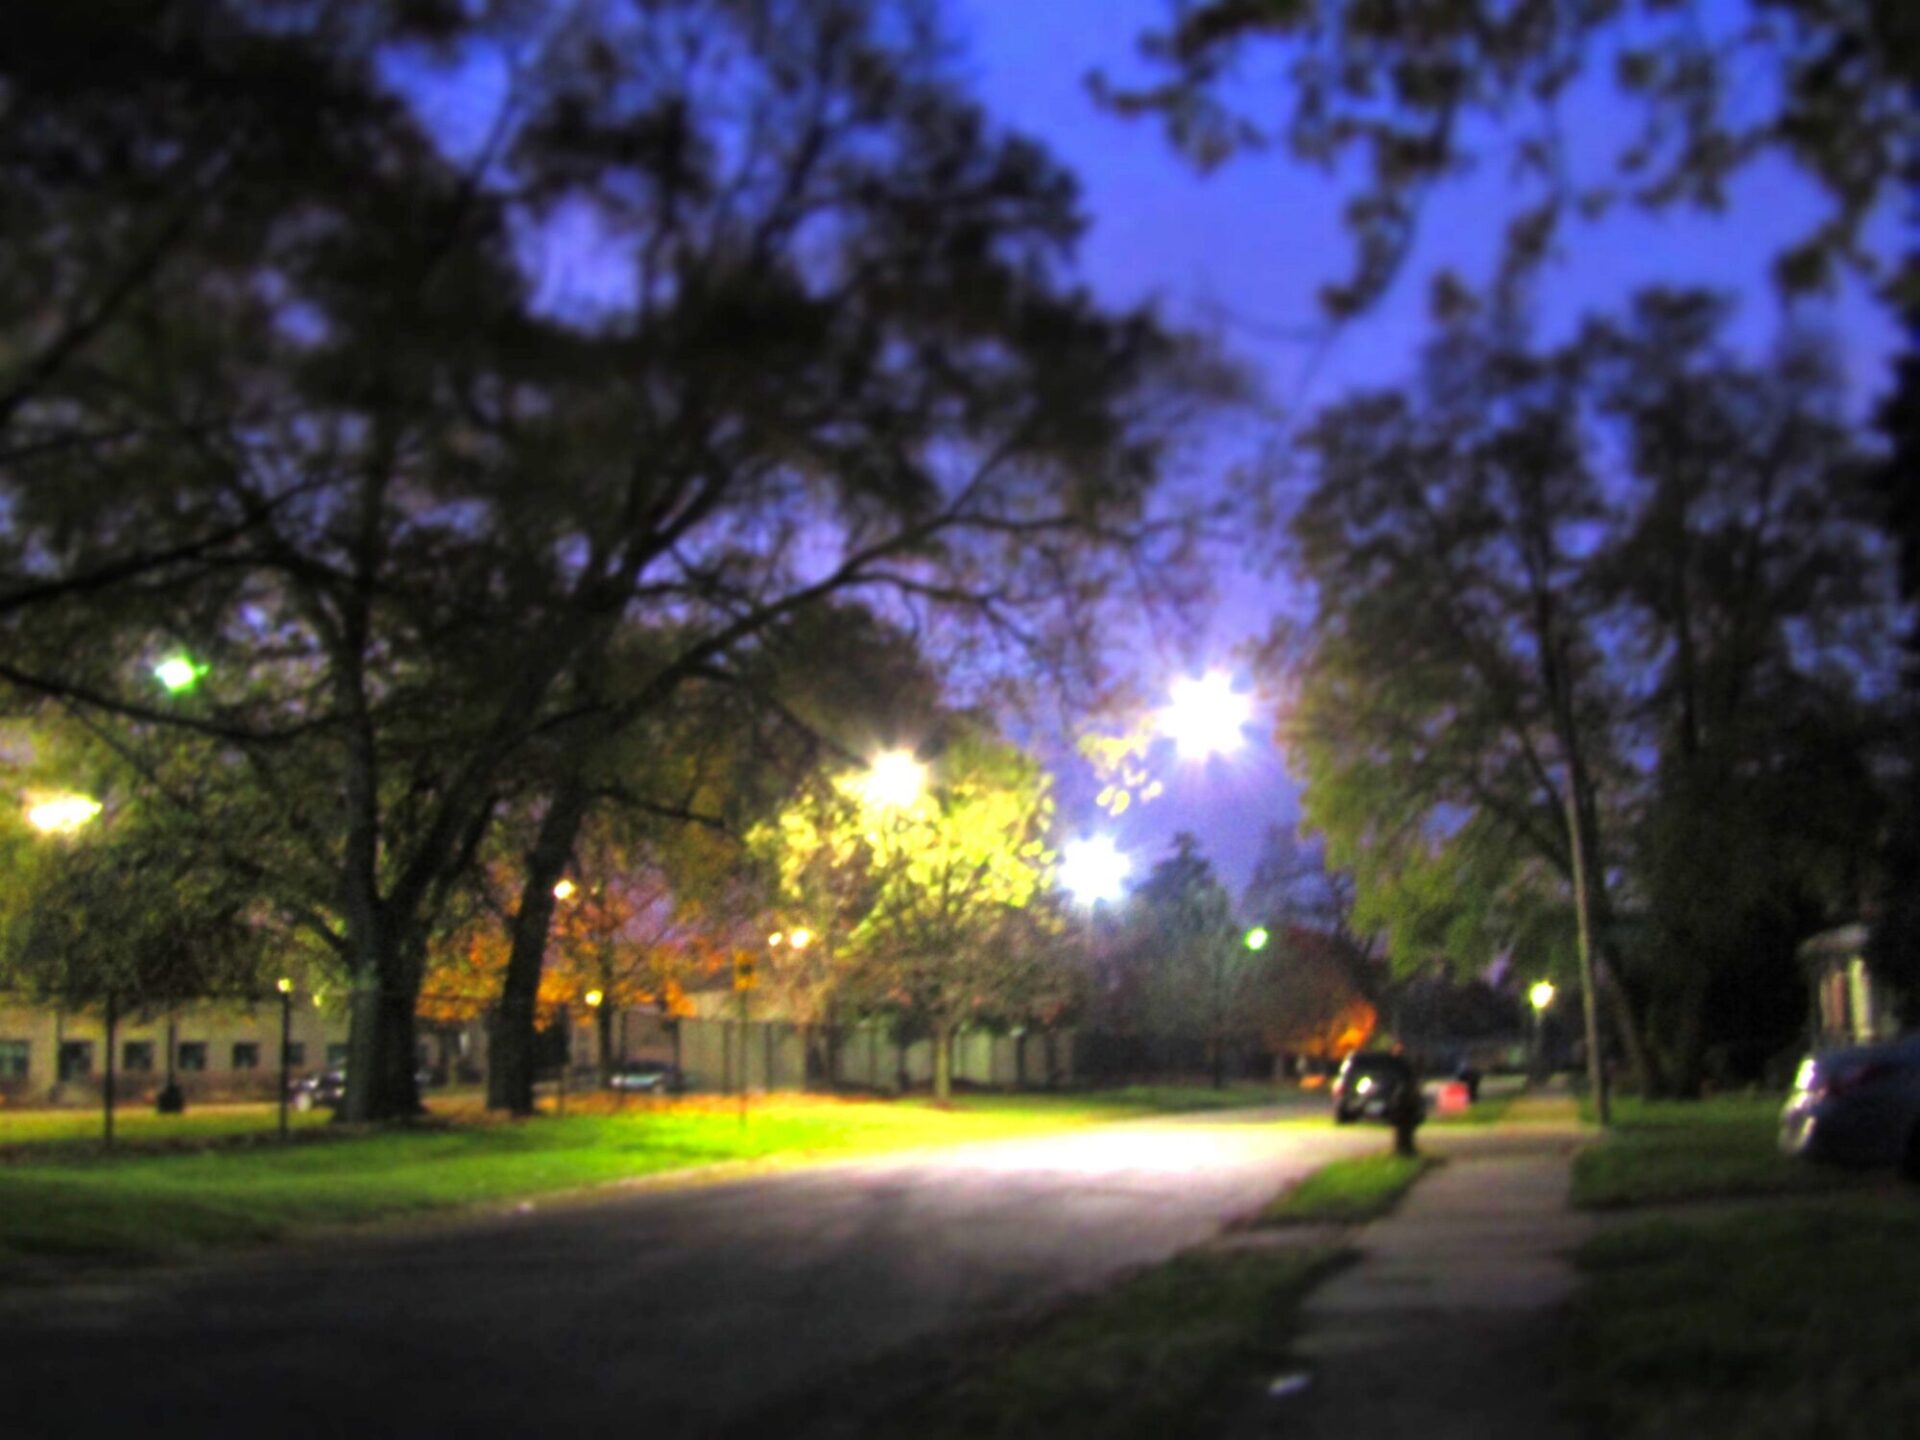 a street with trees and lights at night